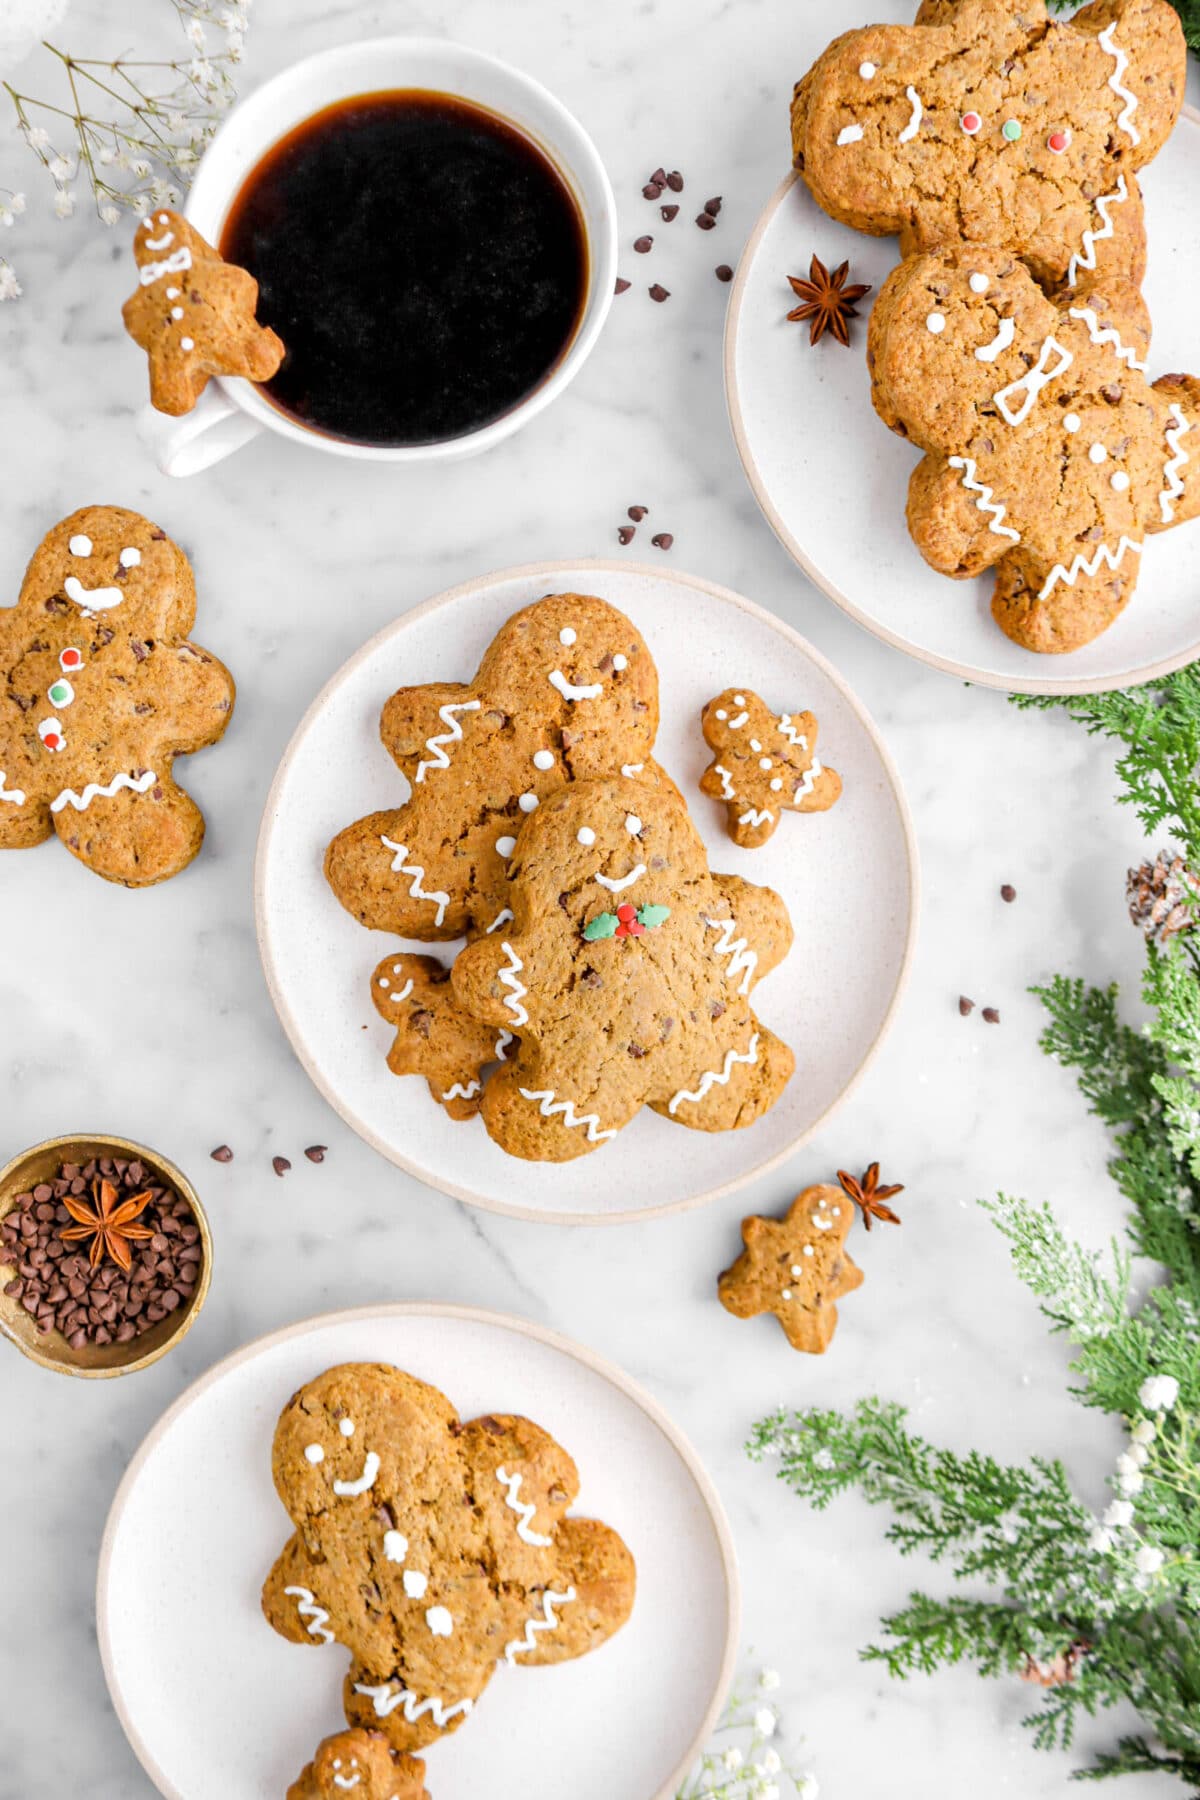 three white plates, each containing gingerbread men shaped scones, with three more scones around on marble surface, with mug of coffee, gold bowl of chocolate chips with star anise pod, and green garland beside.